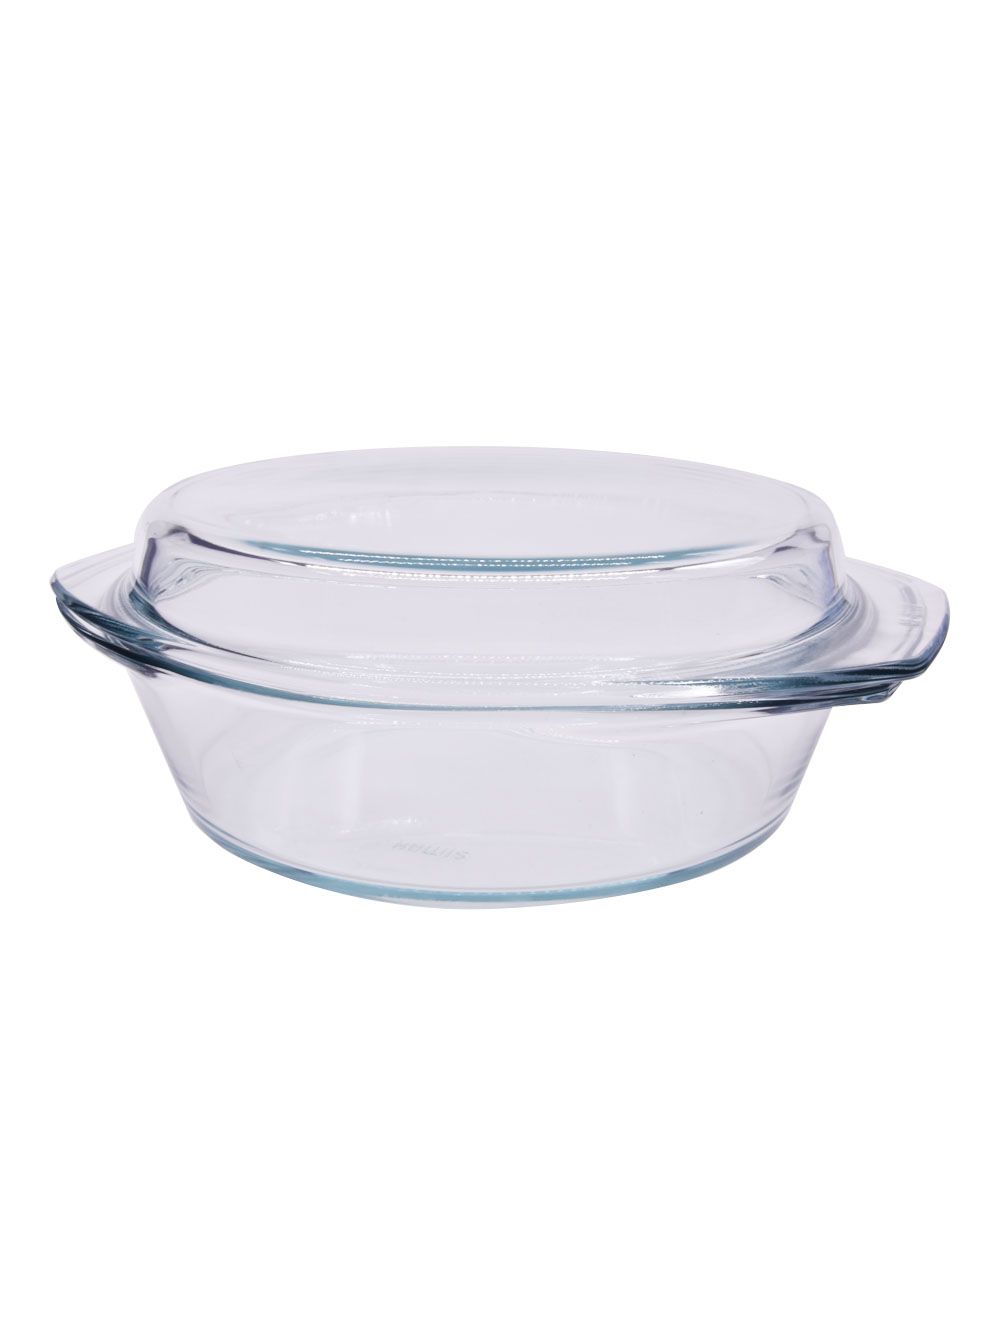 Simax Glassware Round Casserole Pan With Lid, 2-Quart